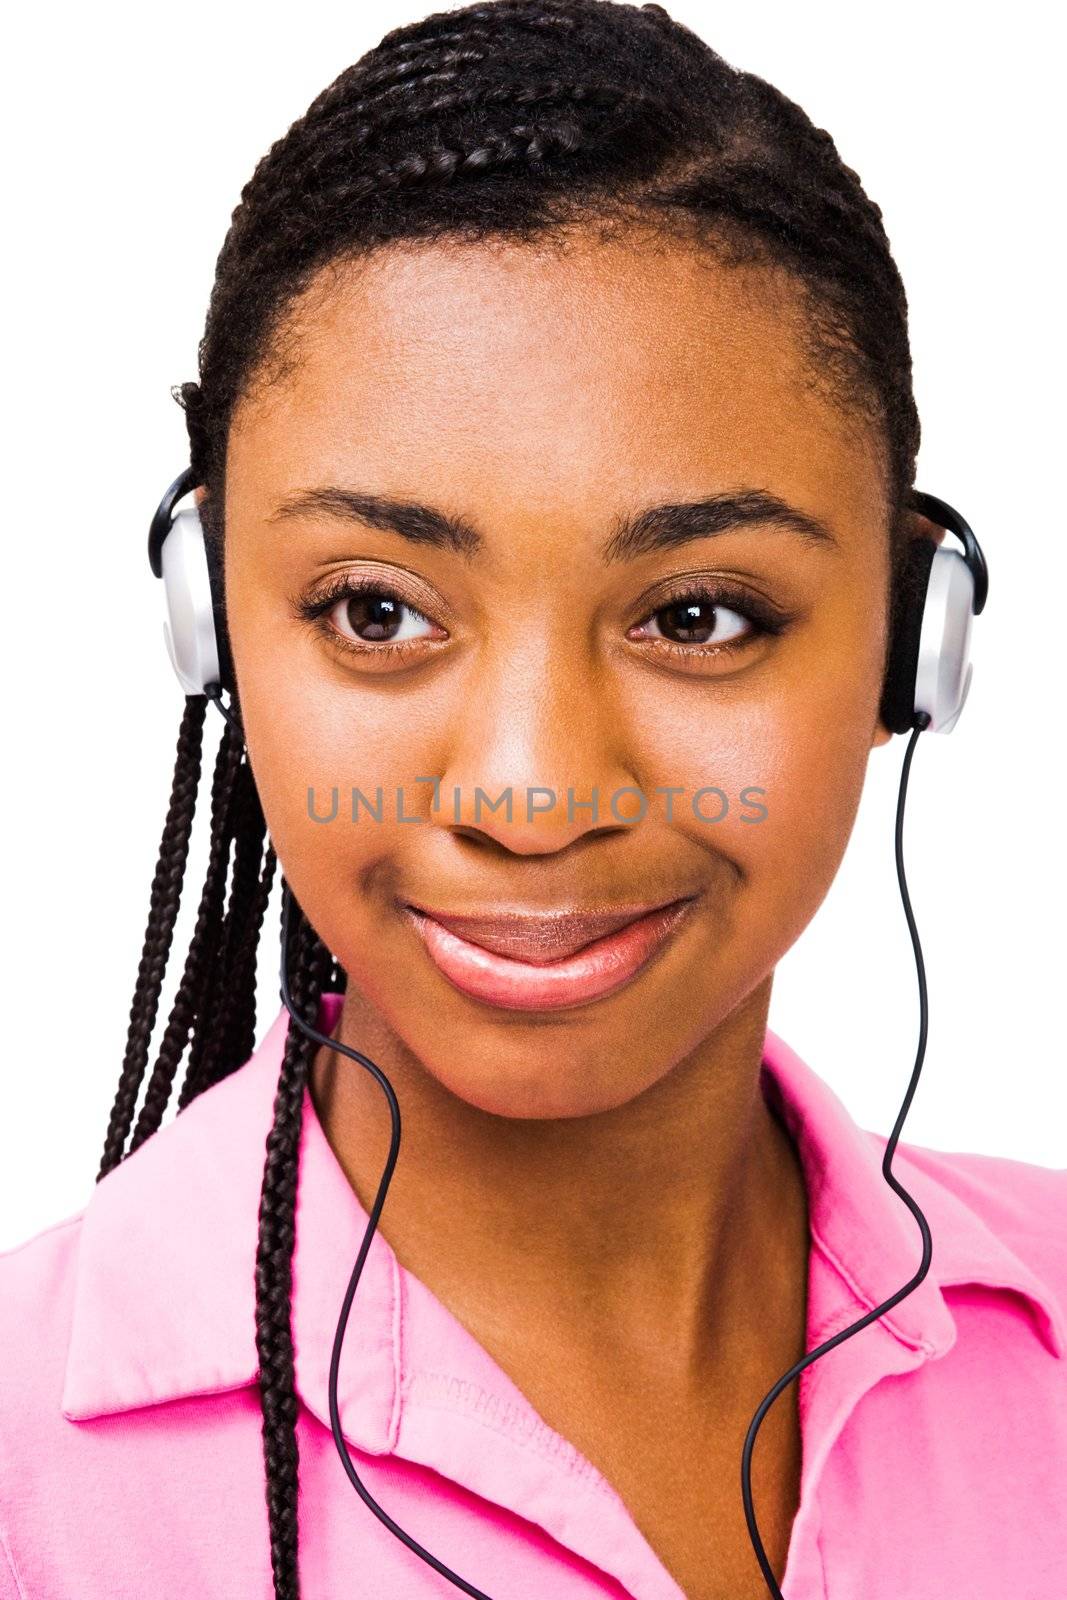 Fashion model listening to music on headphones isolated over white